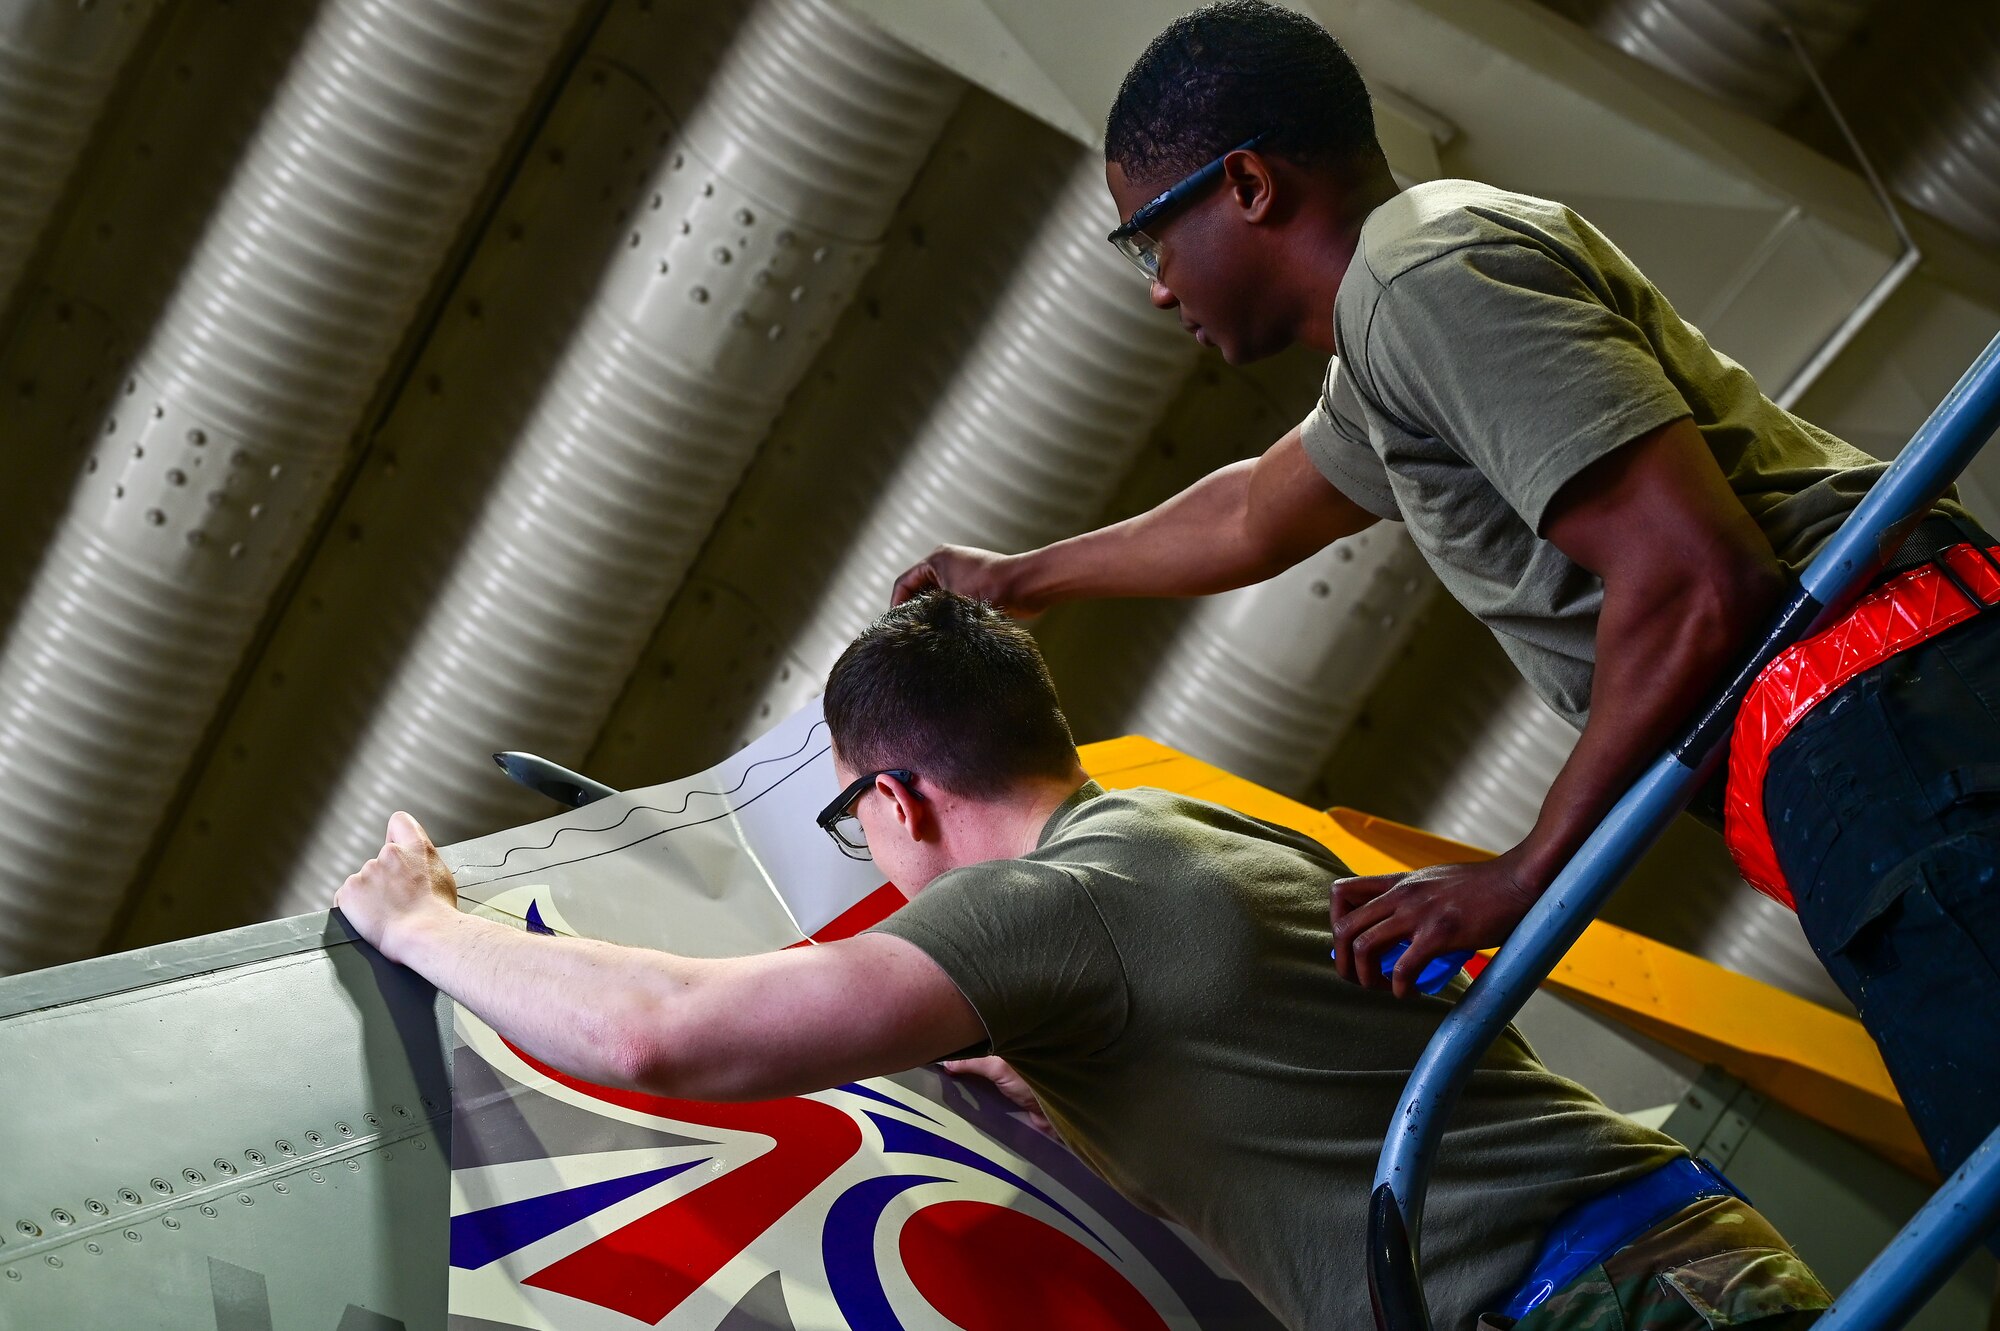 Staff Sgt. Matthew Campbell, 8th Maintenance Squadron aircraft structural maintenance (AMS) craftsman, and Senior Airman Connor Young, 8th MXS AMS journeyman, apply a 70th anniversary heritage tail flash at Osan Air Base, Republic of Korea, May 1, 2023. 8th Fighter Wing and ROK Air Force 38th Fighter Group F-16s will bear the decals to symbolize the nations’ partnership during aerial missions. (U.S. Air Force photo by Tech. Sgt. Timothy Dischinat)